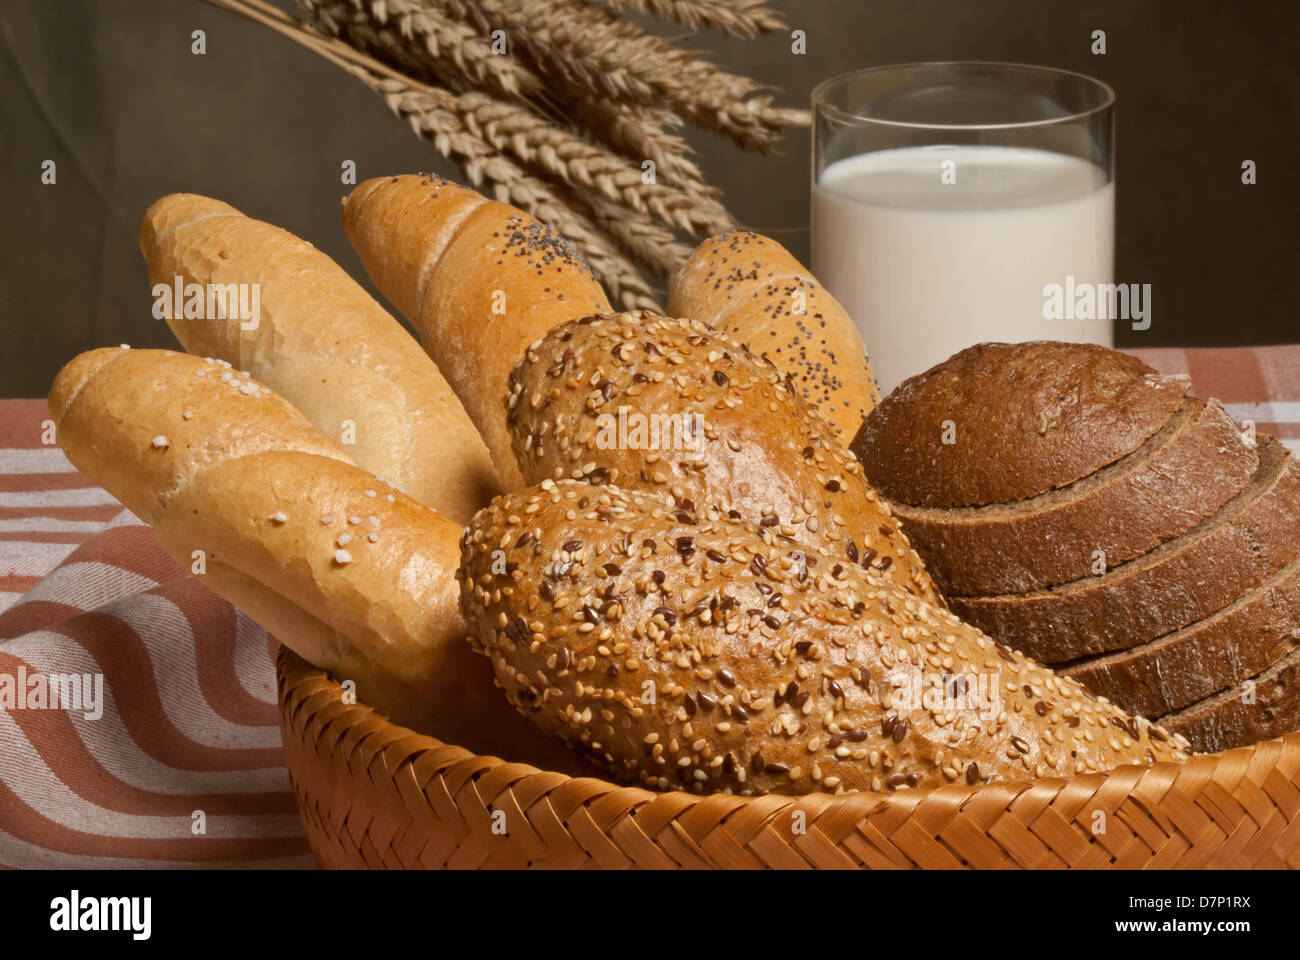 bakery products Stock Photo